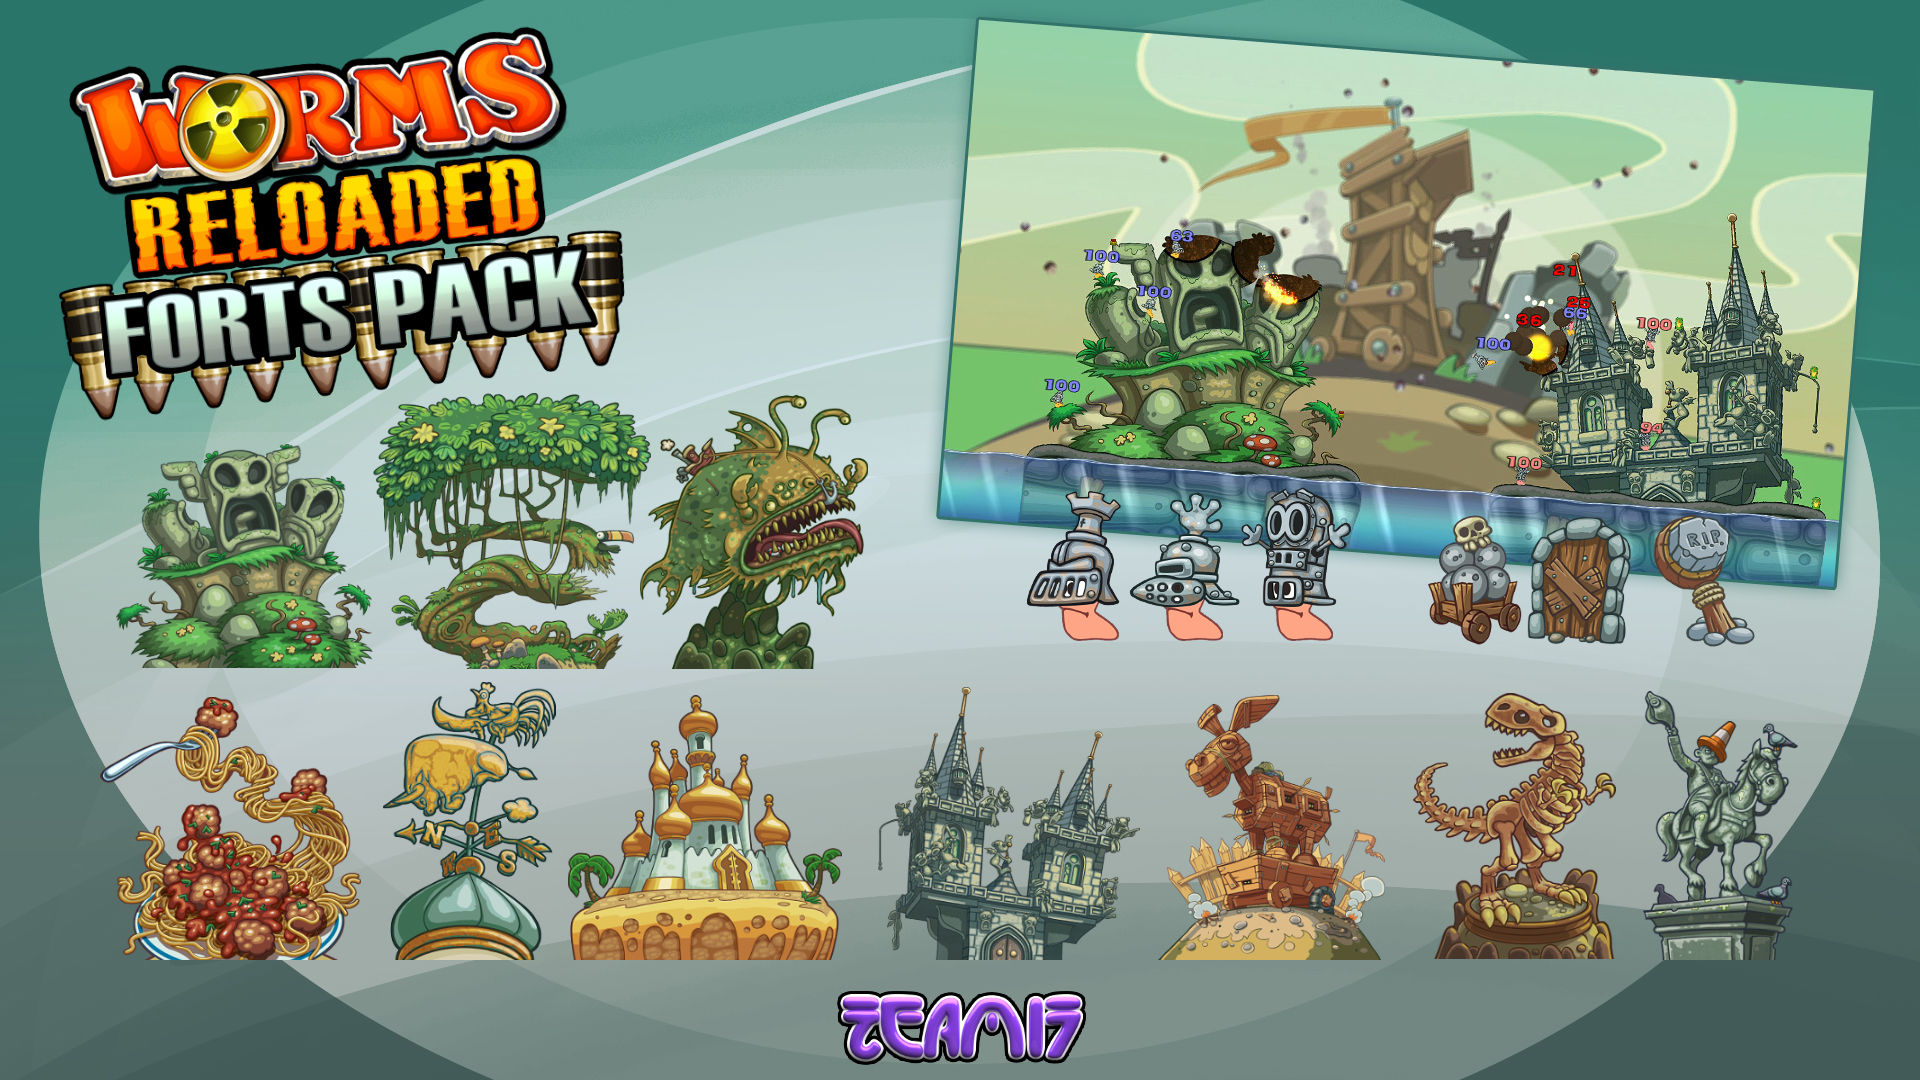 Worms Reloaded: Forts Pack Featured Screenshot #1